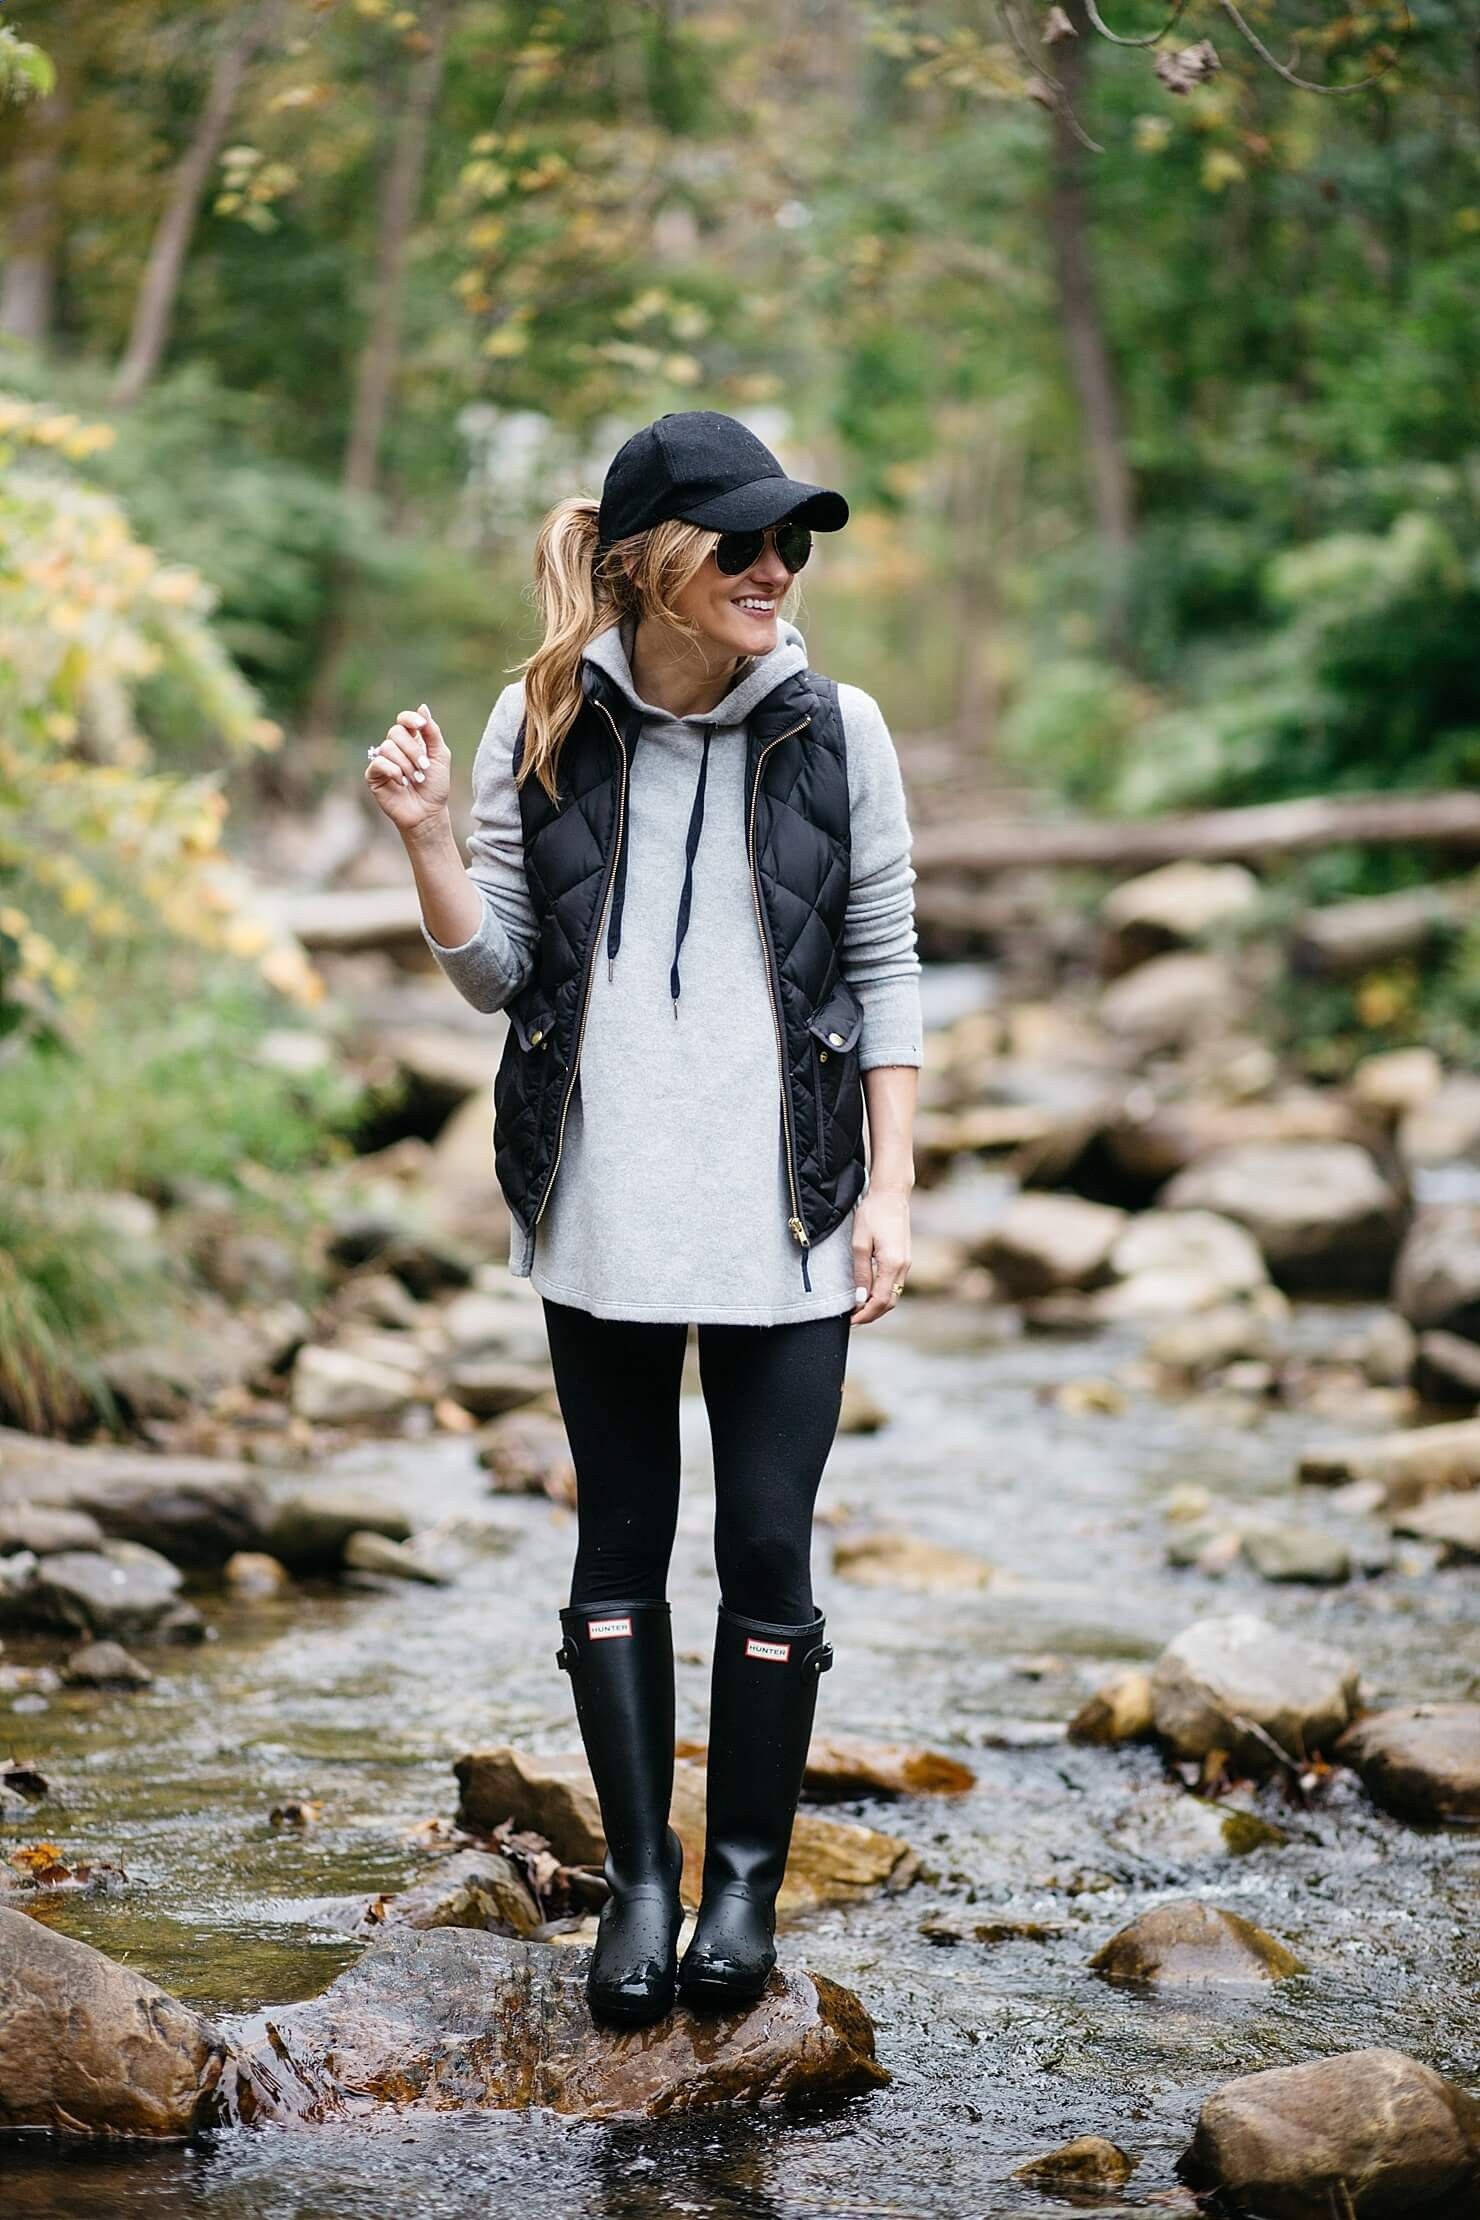 Chic Rainy Day Outfit Inspiration with
Boots